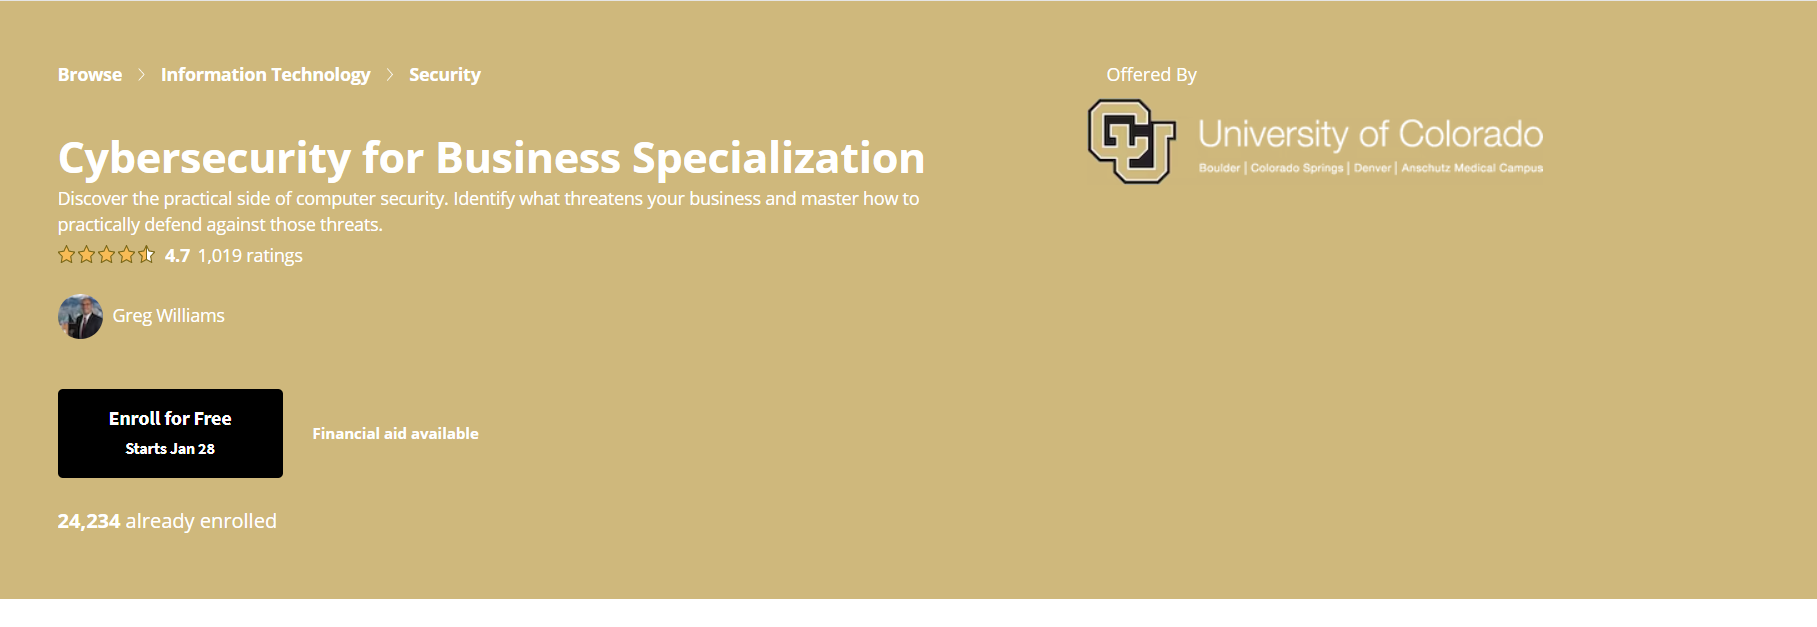 Cybersecurity for Business Specialization by the University of Colorado